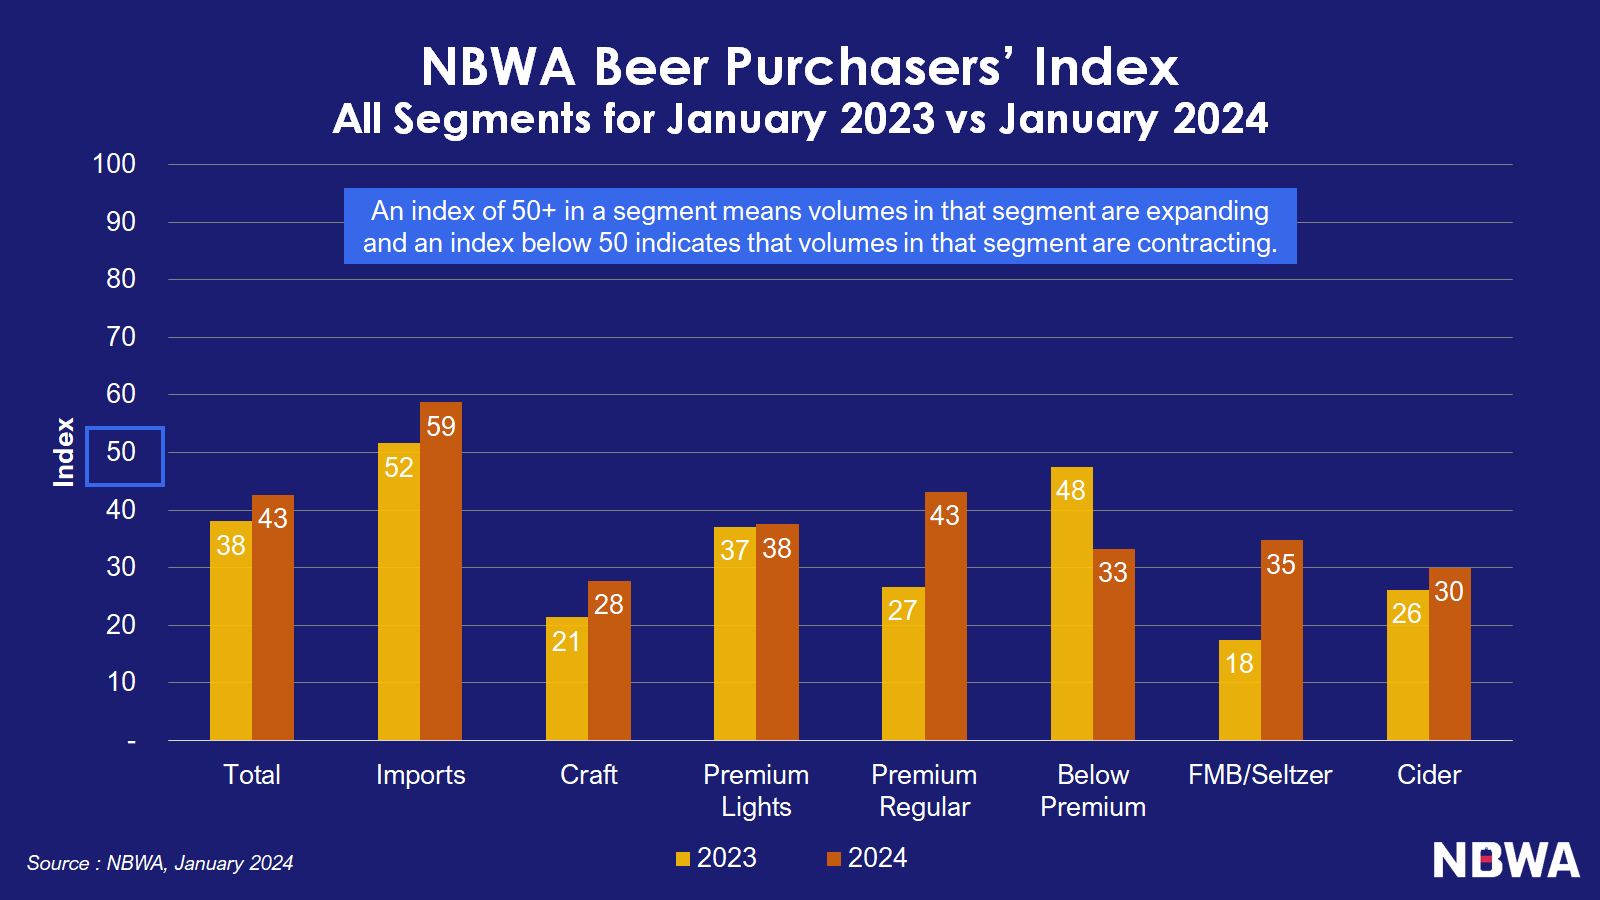 Beer Wholesalers Continue to Step Up Purchases